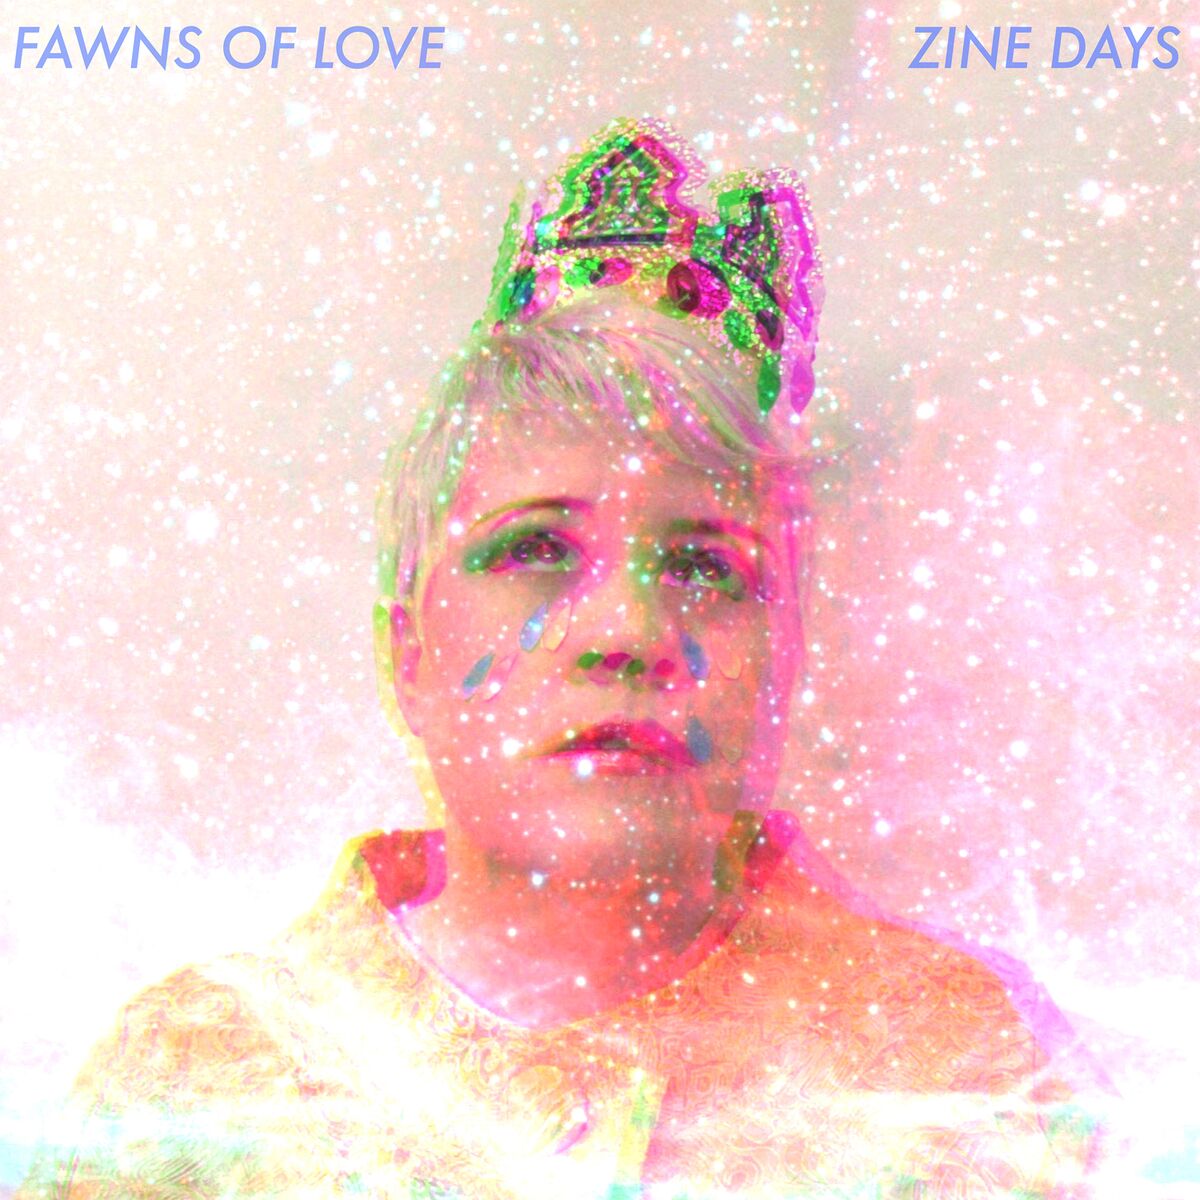 Fawns of Love